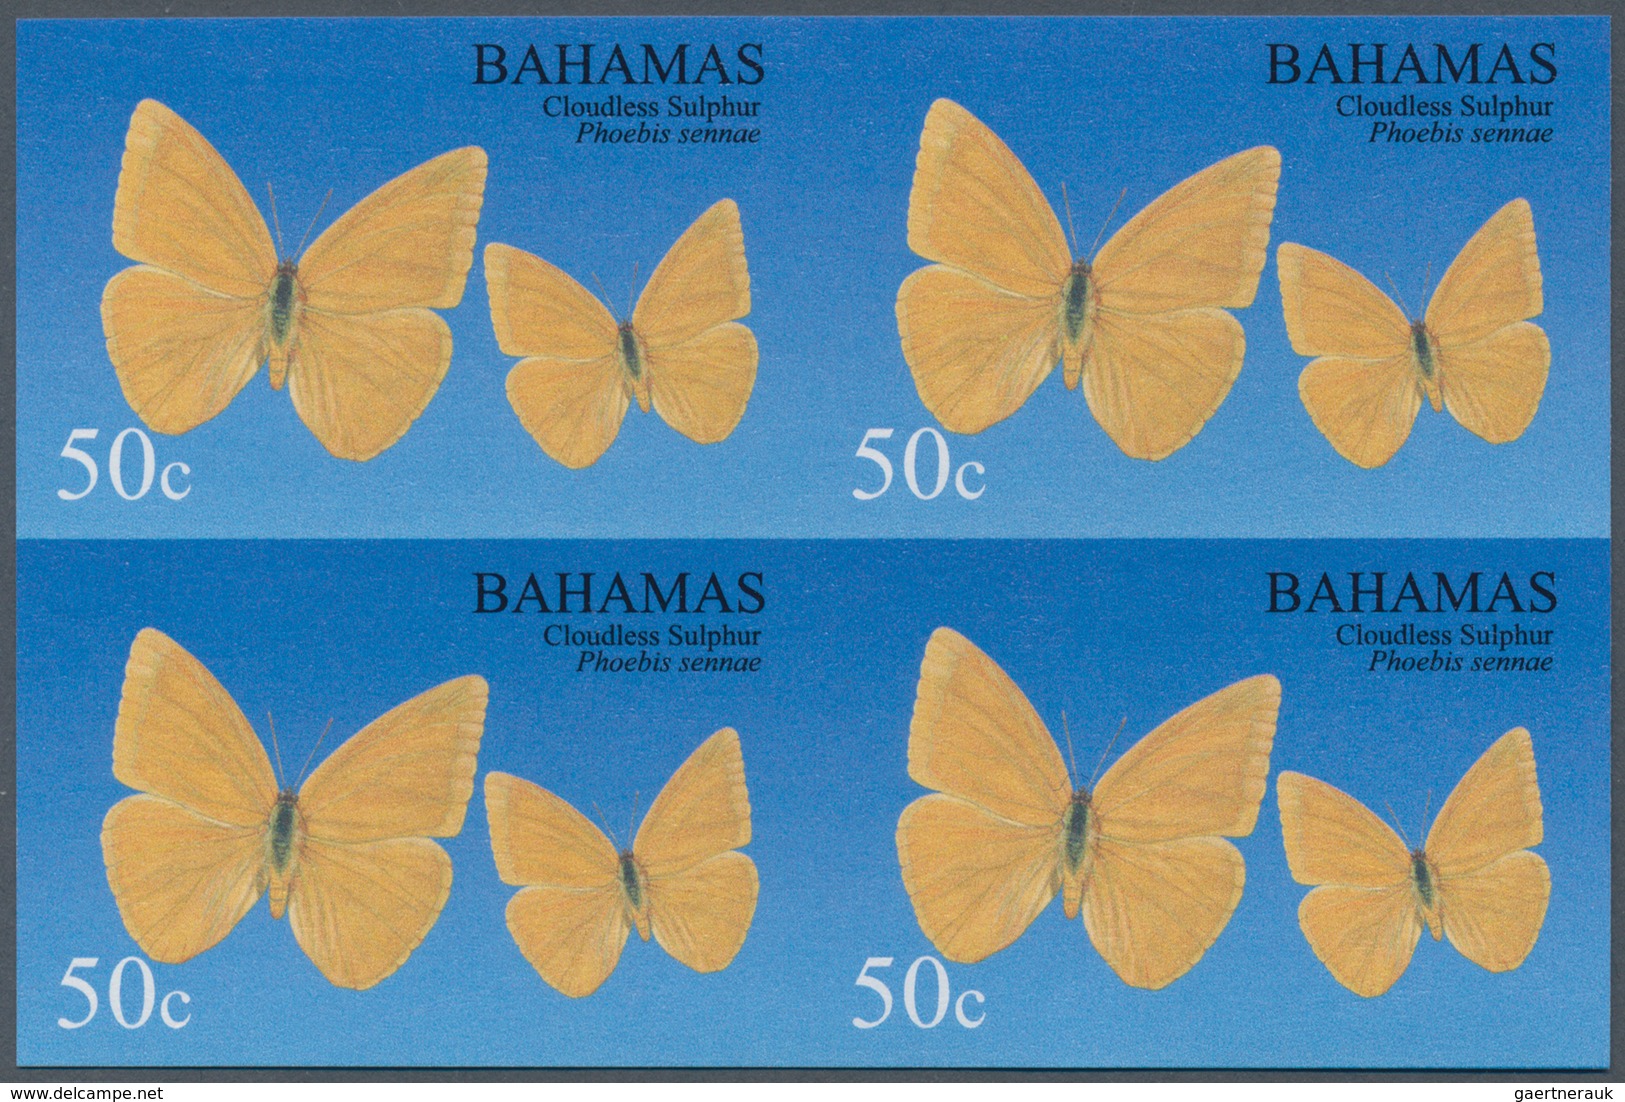 Thematik: Tiere-Schmetterlinge / Animals-butterflies: 2008, Bahamas. IMPERFORATE Block Of 4 For The - Vlinders